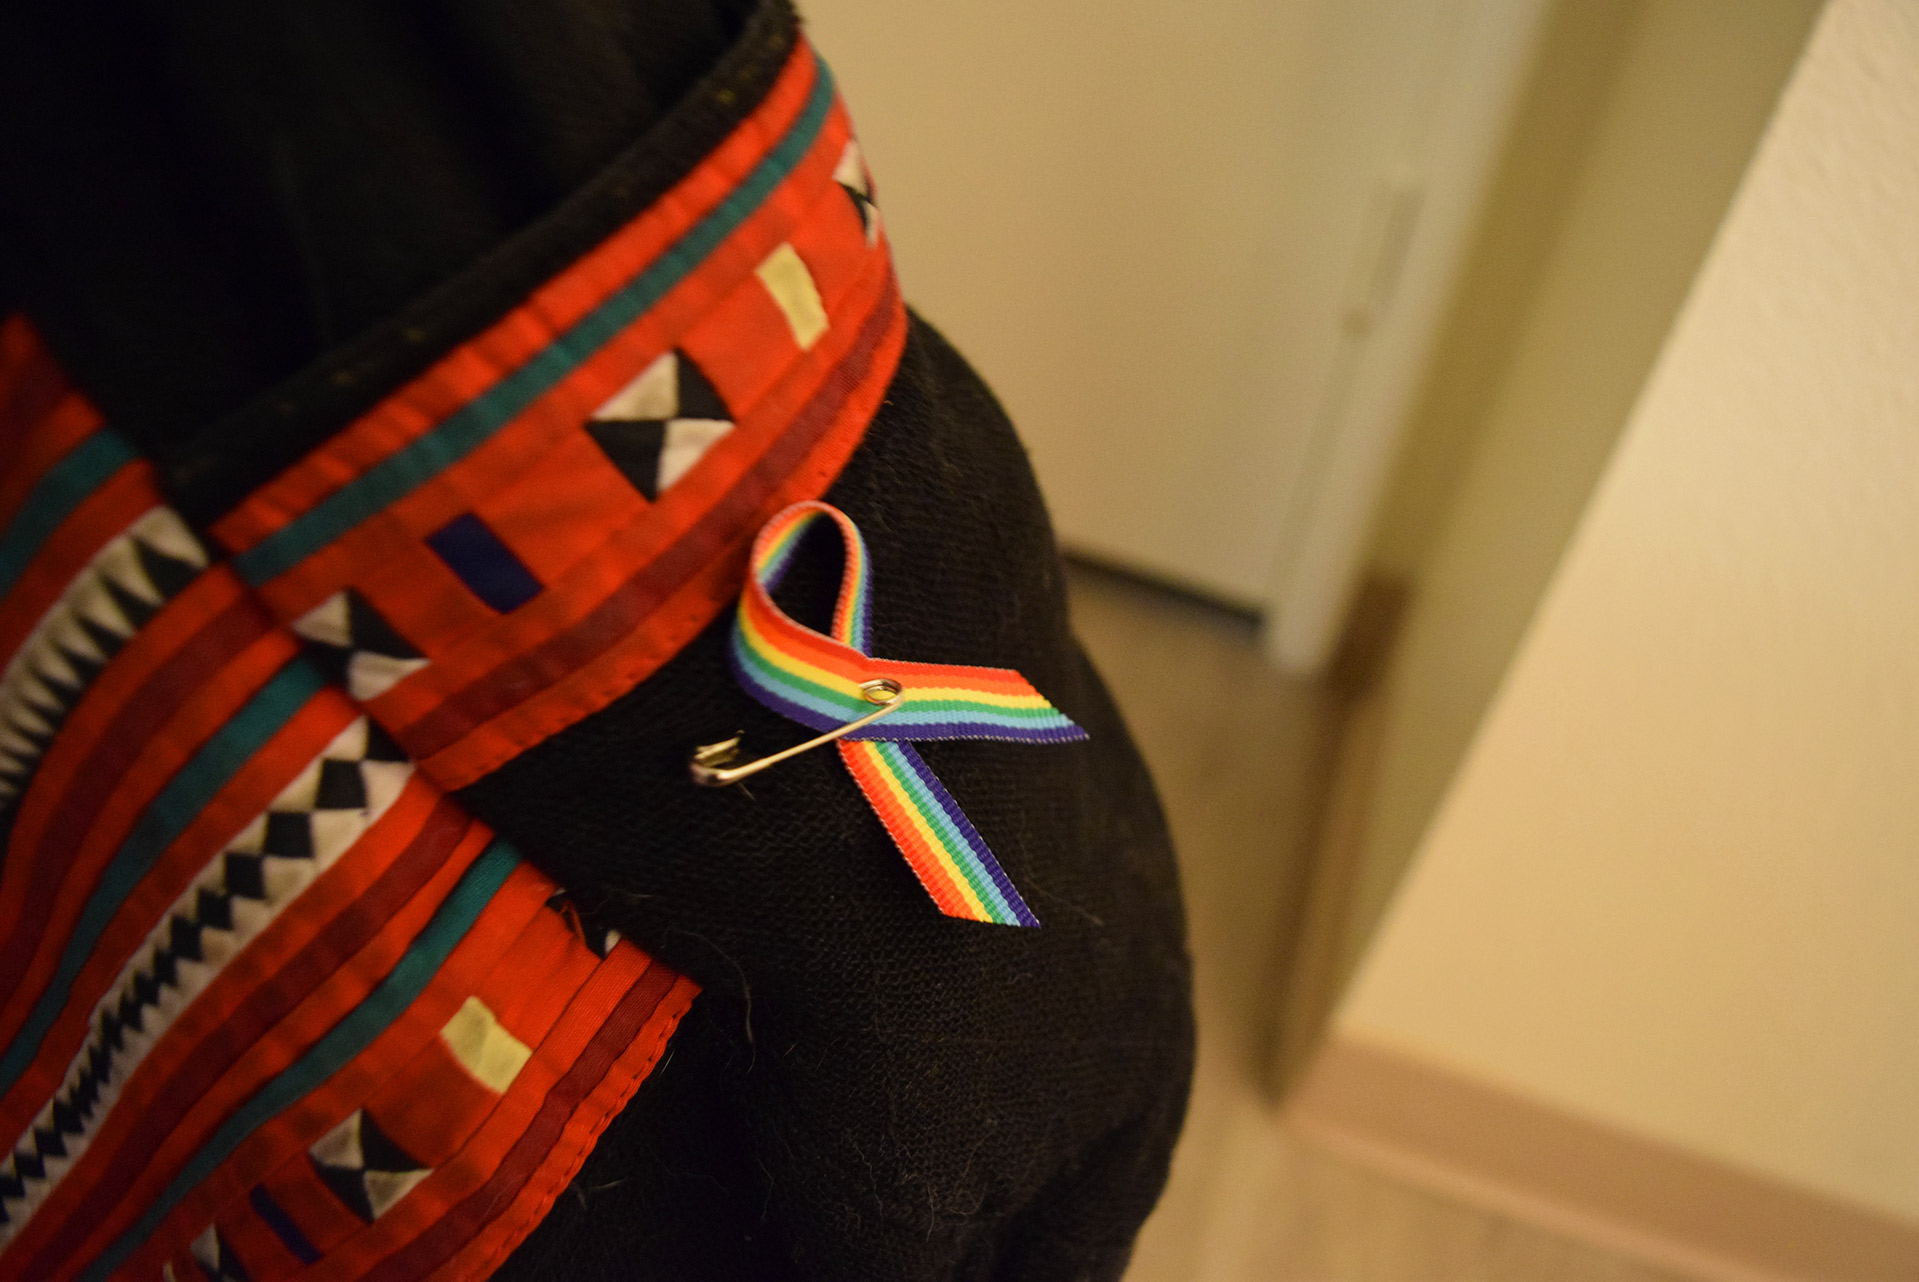 Though the travel ban will be well-covered in future pieces, another important facet to the present-day culture of LGBTQ+ students at Cal Poly is the prevalence of allies. Spotted here on the backpack of nutrition major and fourth year Spalding Bristow is the rainbow ribbon pin given out in 2017-18 by the Queer Student Union and PRISM programs to advocate for LGBTQ+ youth acceptance and public display of ally sentiment. Bristow says “...it must be awful not feeling safe to fully be yourself, and I wanted to show that I support all love.” 
Photo Credit: Katelyn Biddle